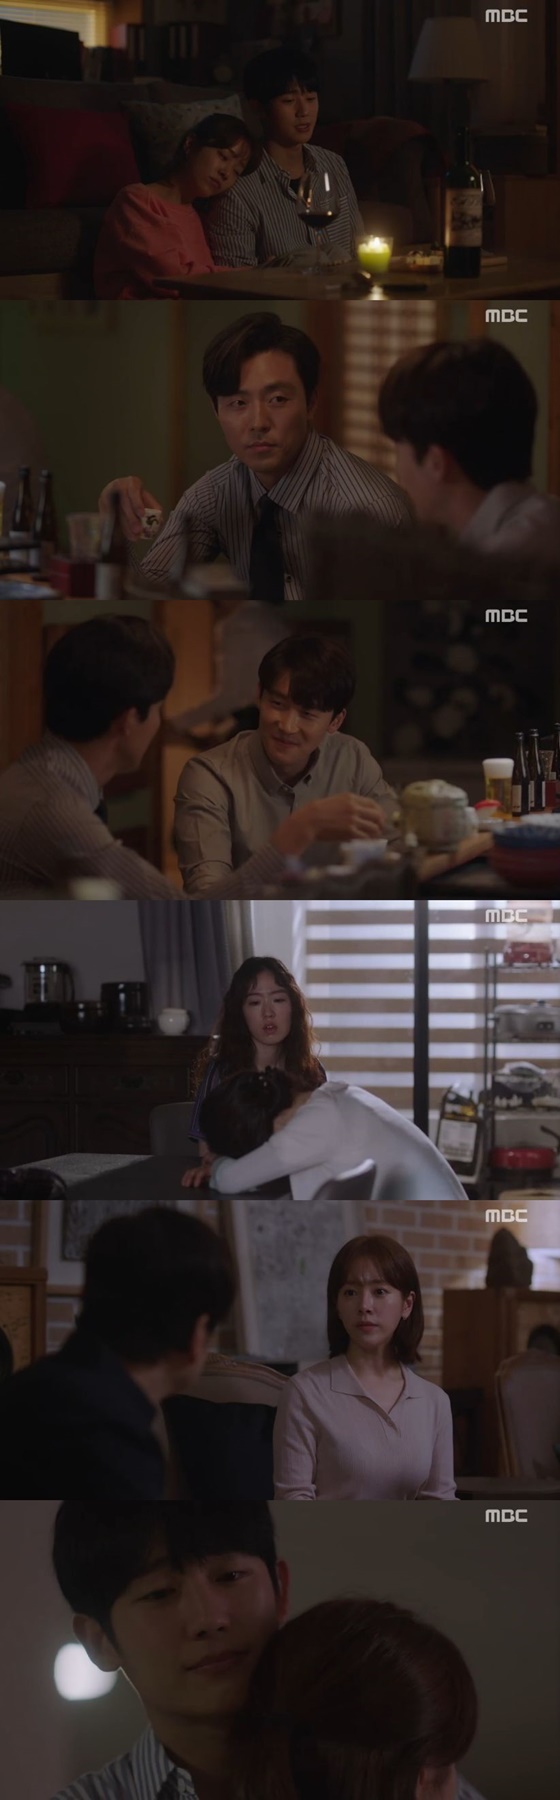 In the MBC drama Spring Night (playplayplay by Kim Eun, directed by Ahn Pan-seok), which was broadcast on the afternoon of the 4th, it included the images of Yoo Ji-Ho (Jeong Hae-in) and Lee Jung-in (Han Ji-min) blocked by a large wall.Lee Jung-in eventually found out that his father, Lee Tae-hak (Song Seung-hwan), had a son.Lee Tae-hak opposed it with a hard time, and Lee Jung-in told him that he wanted to be with Yoo Ji-Ho until the end.Lee then talked with Yoo Ji-Ho, who waited for him, while drinking wine. Yoo Ji-Ho said, I was hurt a lot at home. Today I became a hurt person.Lee Jung-in said, Do not be hard. Whoever is Lee Jung-in is Yoo Ji-Ho, but if it is hard, it is funny.Lee Jae-in (played by Joo Min-kyung) told Shin Hyung-sun (played by Gil Hae-yeon) that I like them both, but I just want them to do what they want. Shin Hyung-sun sighed, saying, Do not be your parents.Lee Jae-in asked, Do you know why my big sister asked me to meet her mother? And Shin Hyung-sun replied, Is not it possible that she did not notice? She is a good person.Lee Jae-in said, If you have a big sister, you have to raise her alone. Can you stand her if people see her big sister?So, Shin Hyung-sun fell down on the table and shed tears.Kwon Ki-seok (Kim Jun-han) shared a drink with Nam Si-hoon (Lee Mu-saeng) and said, I will let you come in for free if I inherit my fathers building.But were family first. Tell your sister-in-law to convince her. If we succeed, Ill give you both a reward.Im not kidding, he said seriously, giving Nam Si-hoon an attractive offer.Meanwhile, Lee Jung-in took a picture of himself at his house and went to Kwon Ki-seok and found Kwon Young-guk (Kim Chang-wan). Lee handed over the photo and asked if he was the one who sent the photo to his parents.Kwon Young-guk said he was sorry that he had sent it because he guessed that Kwon Ki-seok sent it.Lee Jung-in replied, No, thank you rather. I did not dare to tell my parents, but I was cool.Lee Jung-in asked me to return all the originals, saying that it was uncomfortable to have pictures.